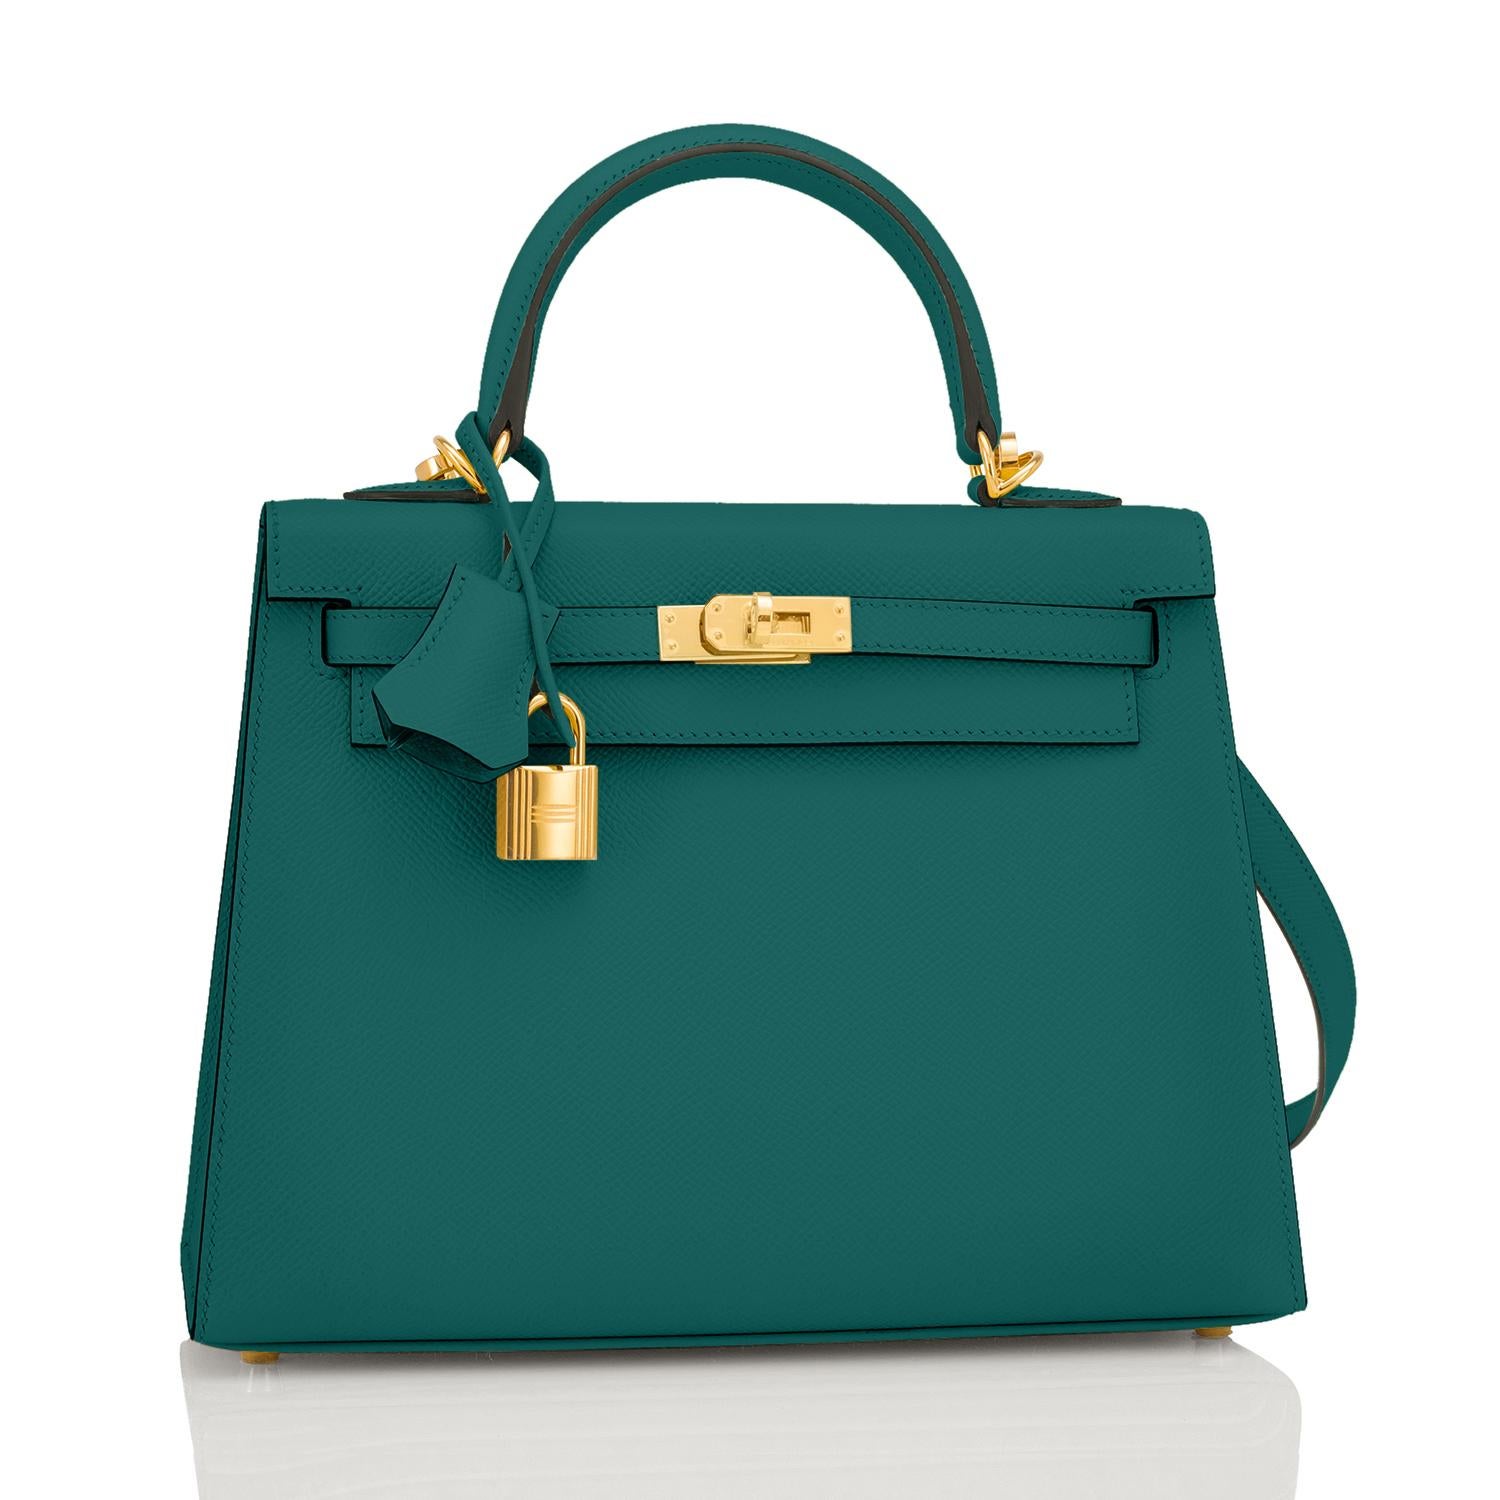 Hermes Kelly 25cm Malachite Jewel Green Epsom Sellier Bag Gold Y Stamp, 2020
Just purchased from Hermes store; bag bears new interior 2020 Stamp.
Brand New in Box. Store Fresh. Pristine Condition (with plastic on hardware).
Perfect gift! Comes full